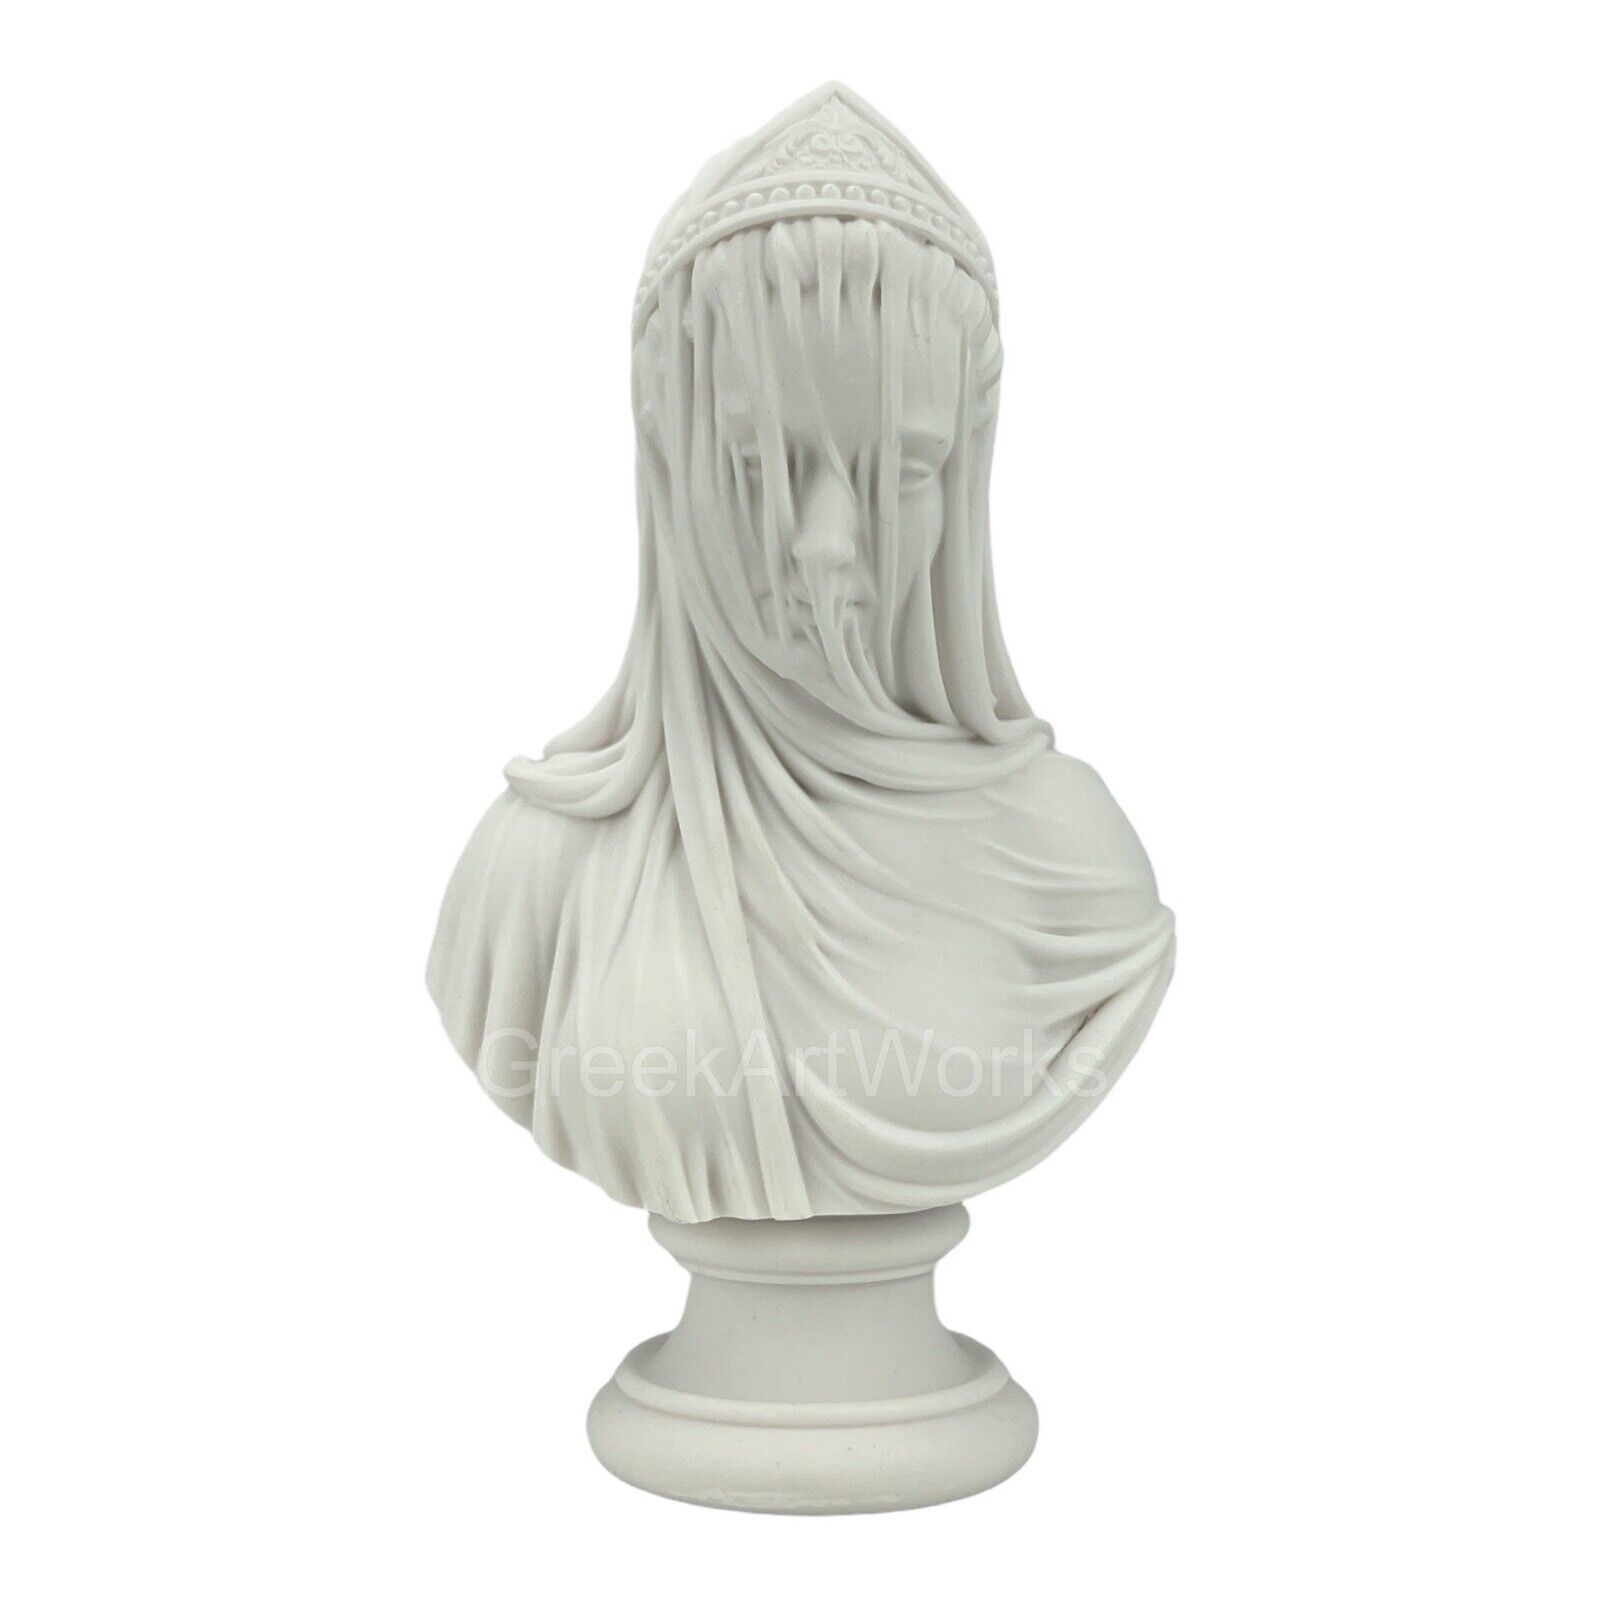 Primary image for The Veiled Maiden Lady Bust Sculpture by Monti 1875 Cast Marble Statue 6.69 in